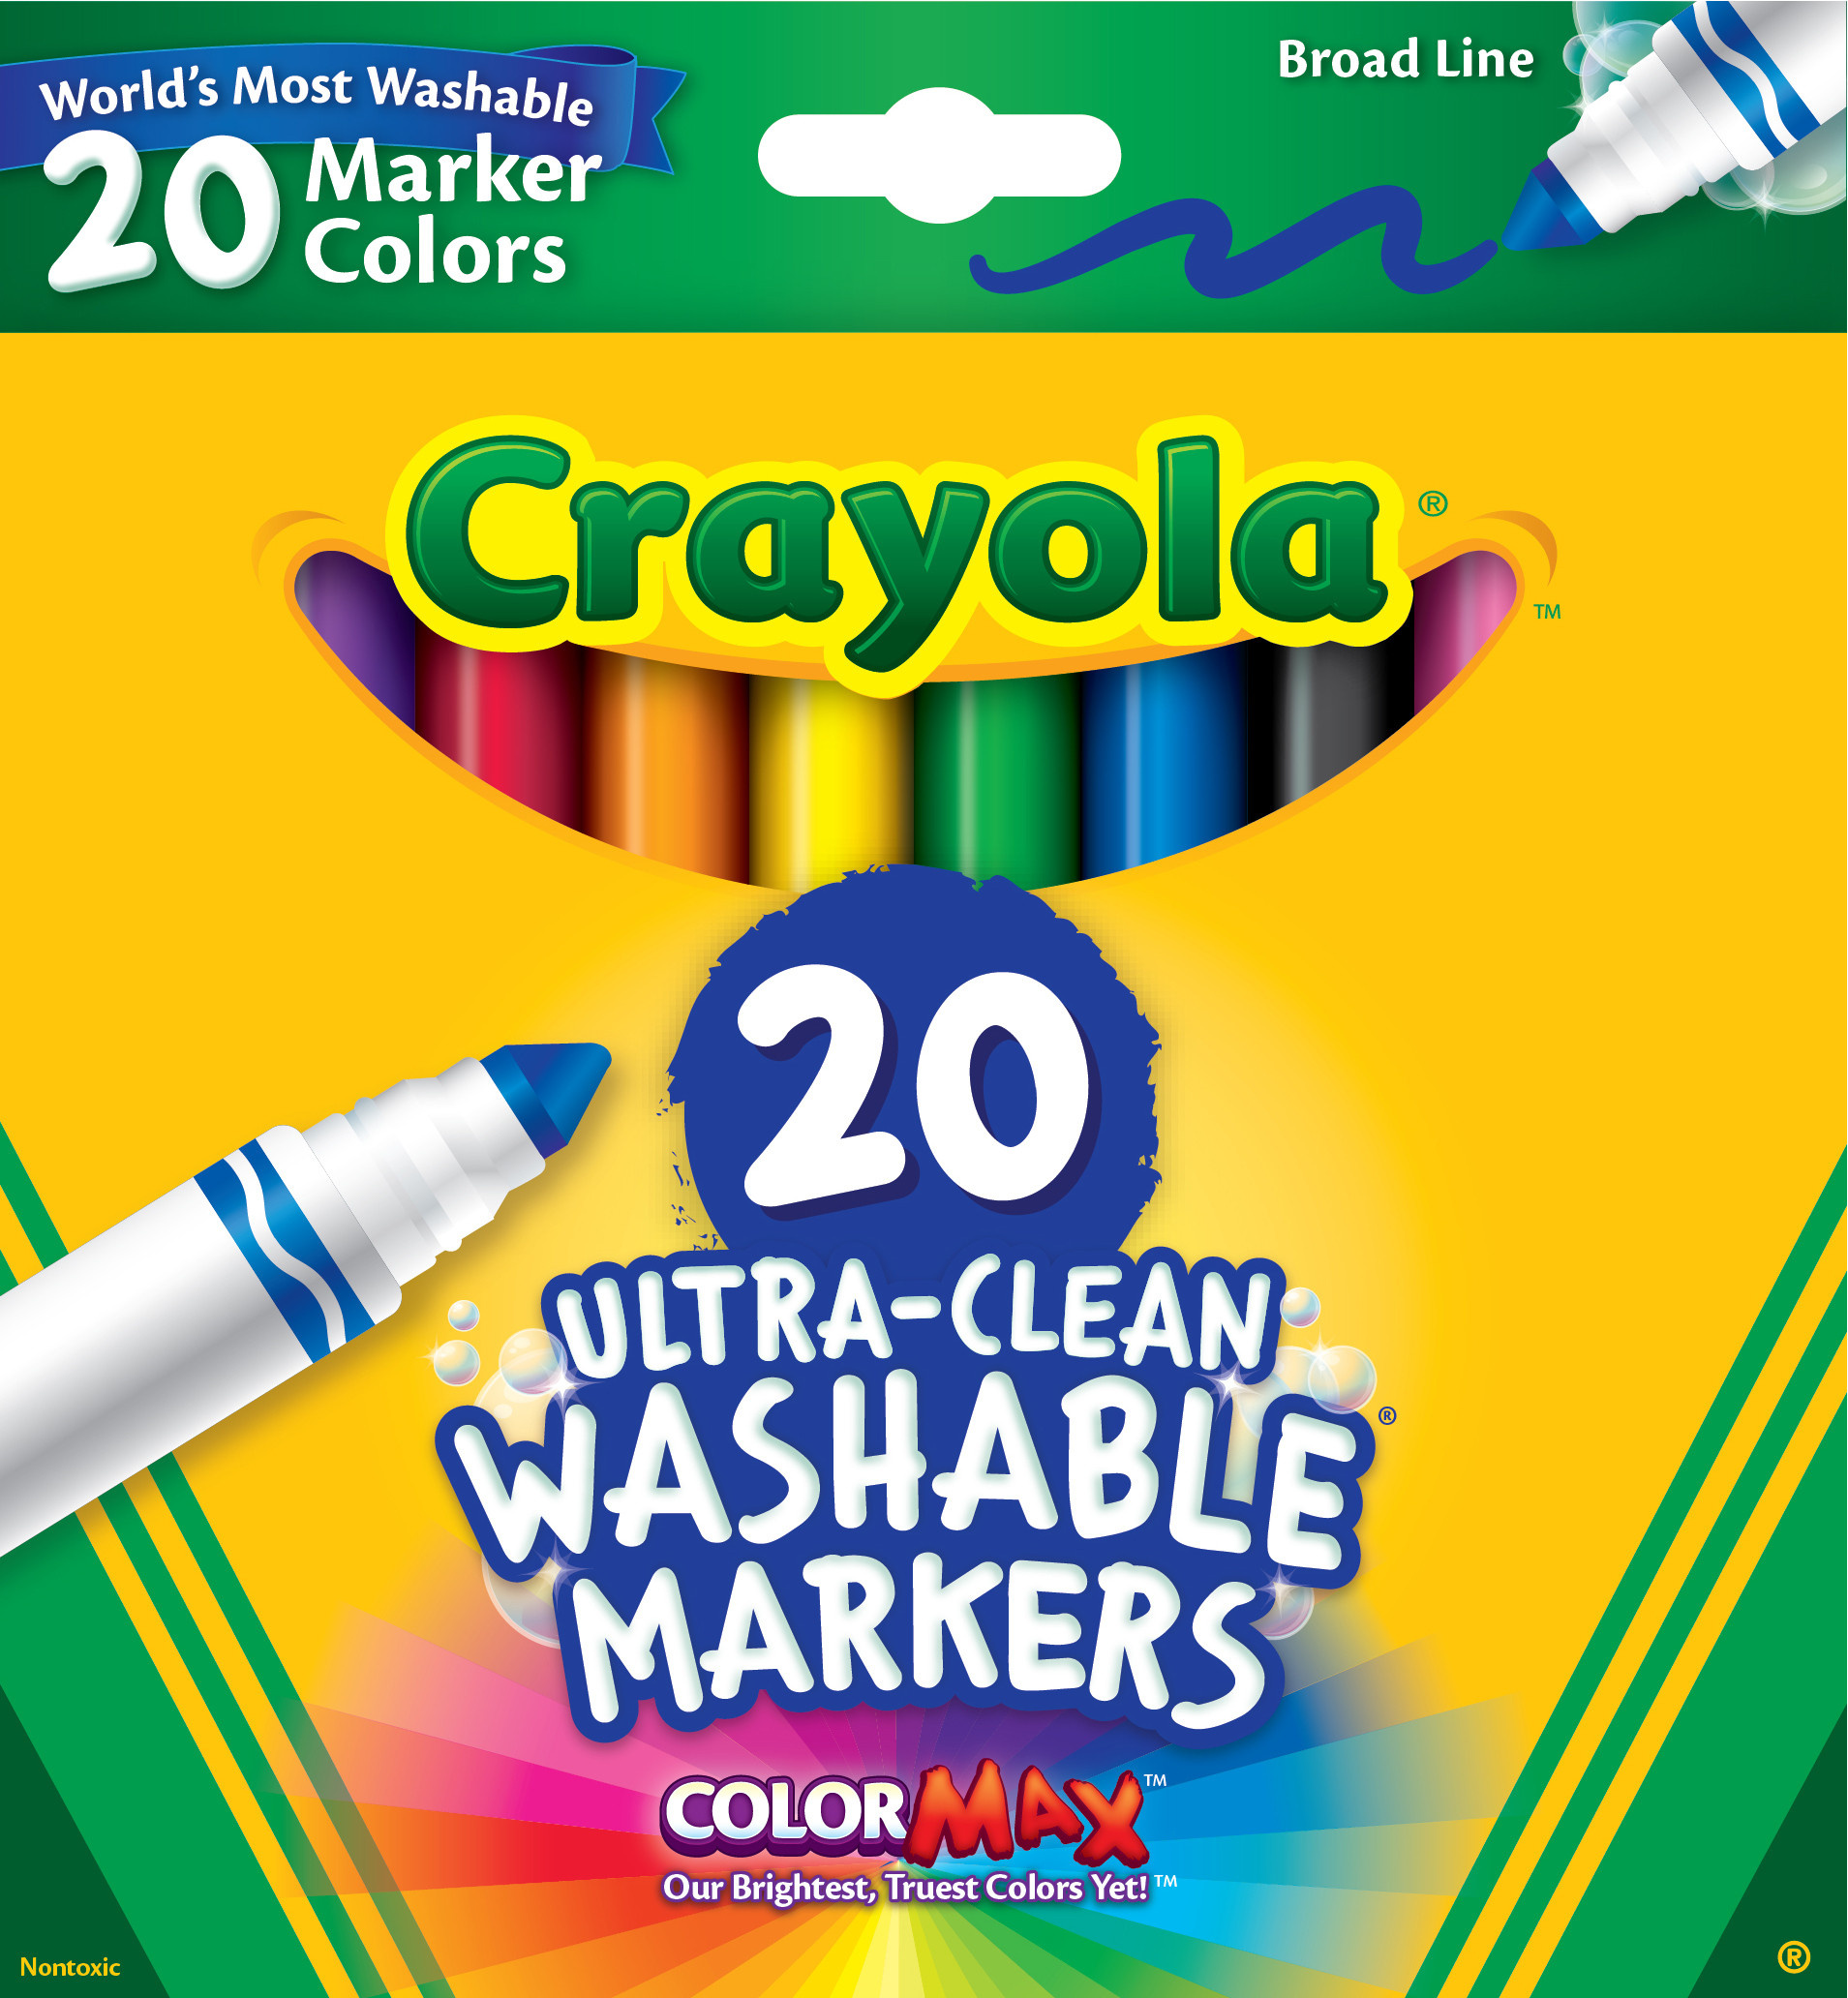 Crayola Ultra-Clean Washable Broad Line Markers, Back to School Supplies, 20 Ct, Classic Colors - image 1 of 8